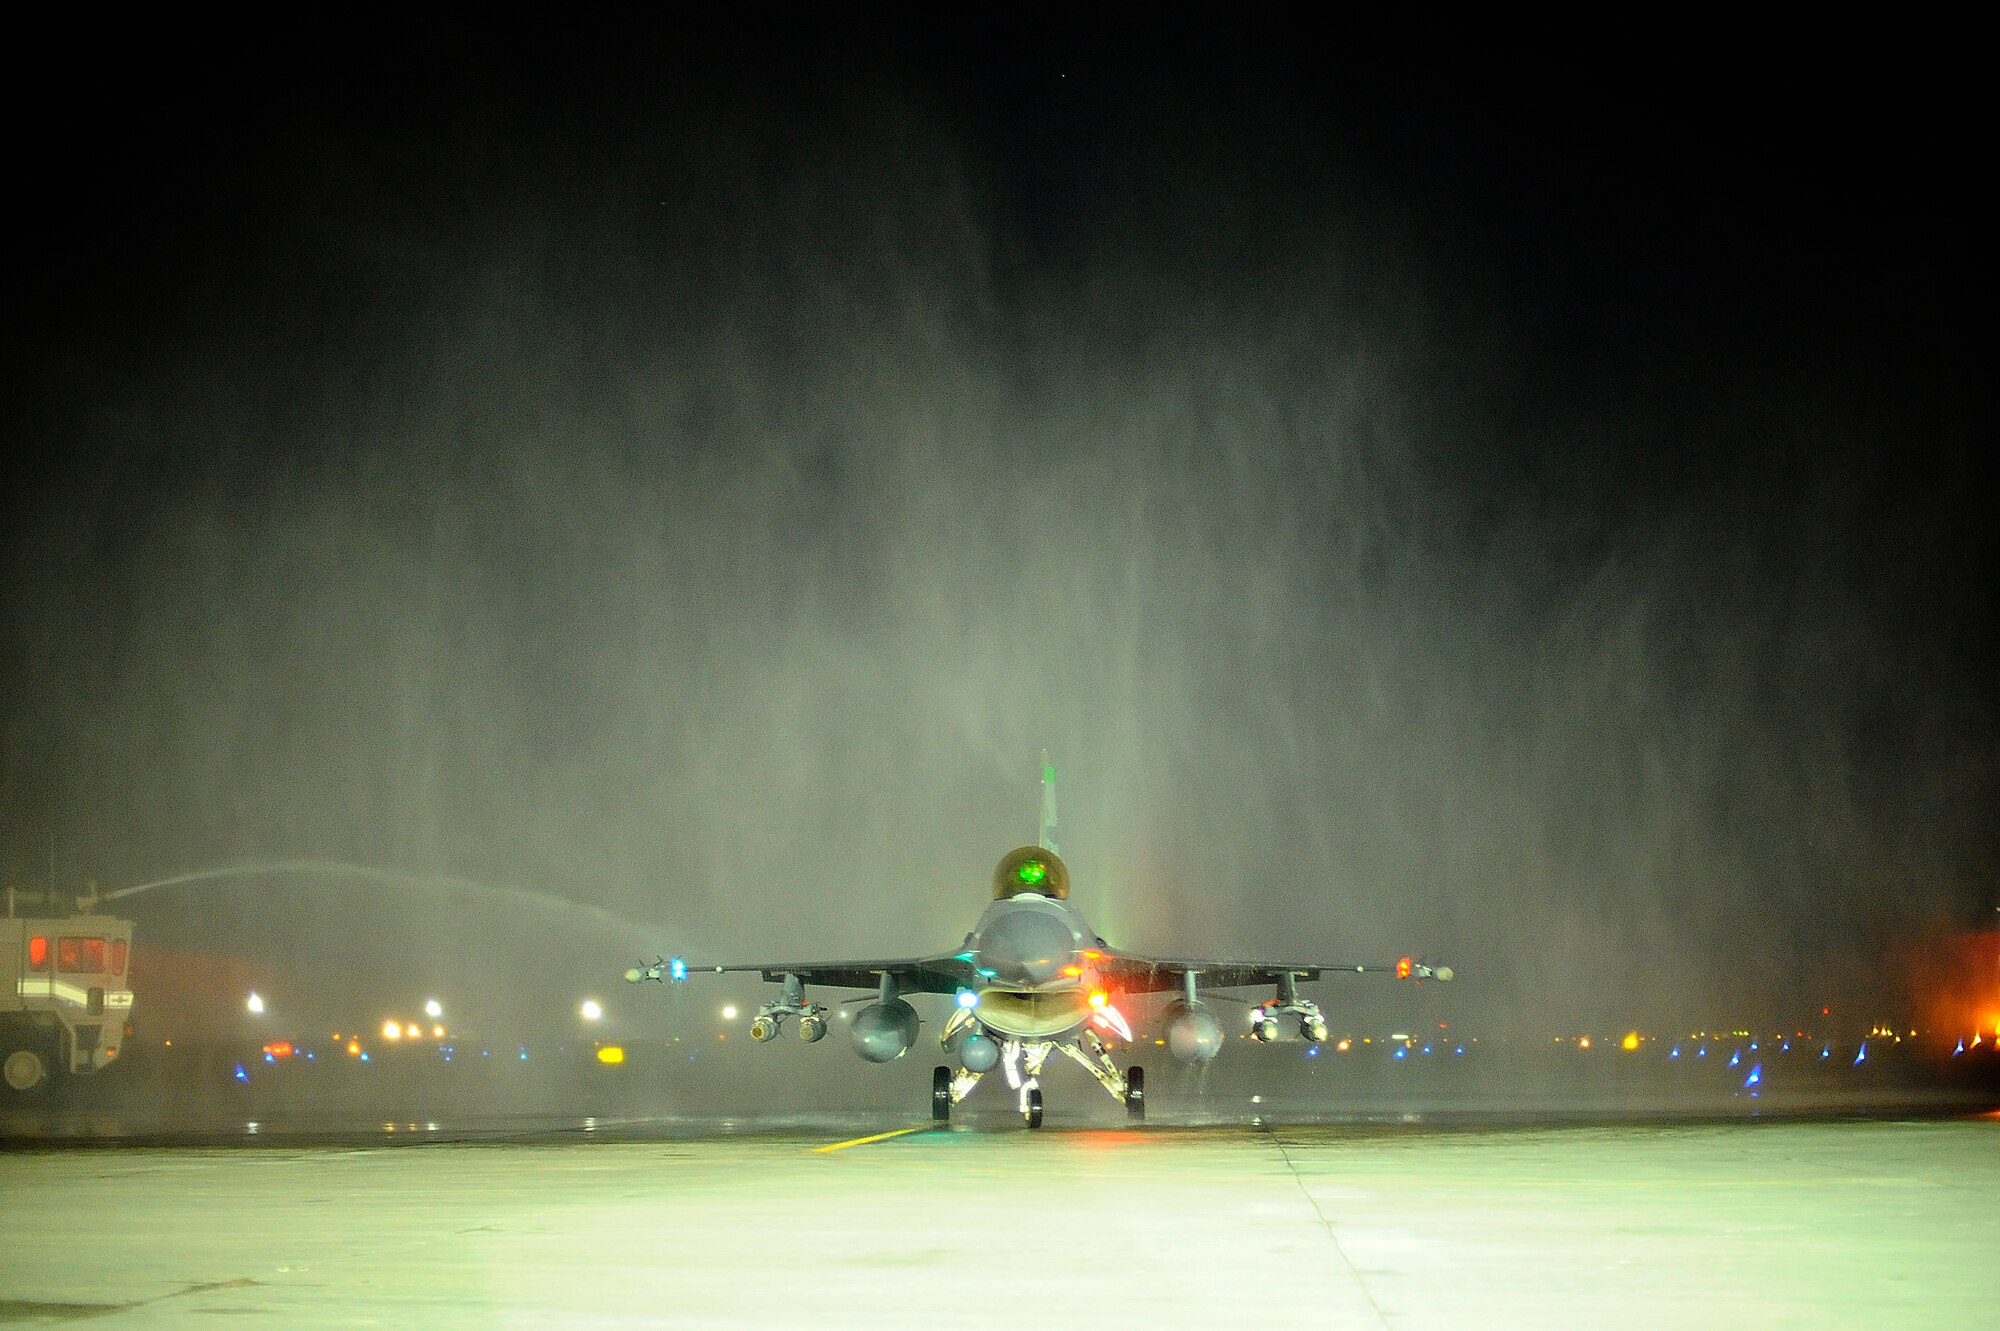 Col. David Romuald, 332nd Expeditionary Operations Group deputy Commander, taxis under the spray of two fire department crash trucks at Joint Base Balad, Iraq, after he completed his 3,000th flying hour in an F-16 Fighting Falcon Dec. 2. Cols. Michael Fantini and John Dolan also completed their 3,000th F-16 flying hour that evening. Approximately 150 F-16 pilots have surpassed this milestone. Fantini is the commander of the 332nd Expeditionary Operations Group and Dolan is the 332nd Air Expeditionary Wing vice commander. (U.S. Air Force photo/Airman 1st Class Jason Epley) (Released)